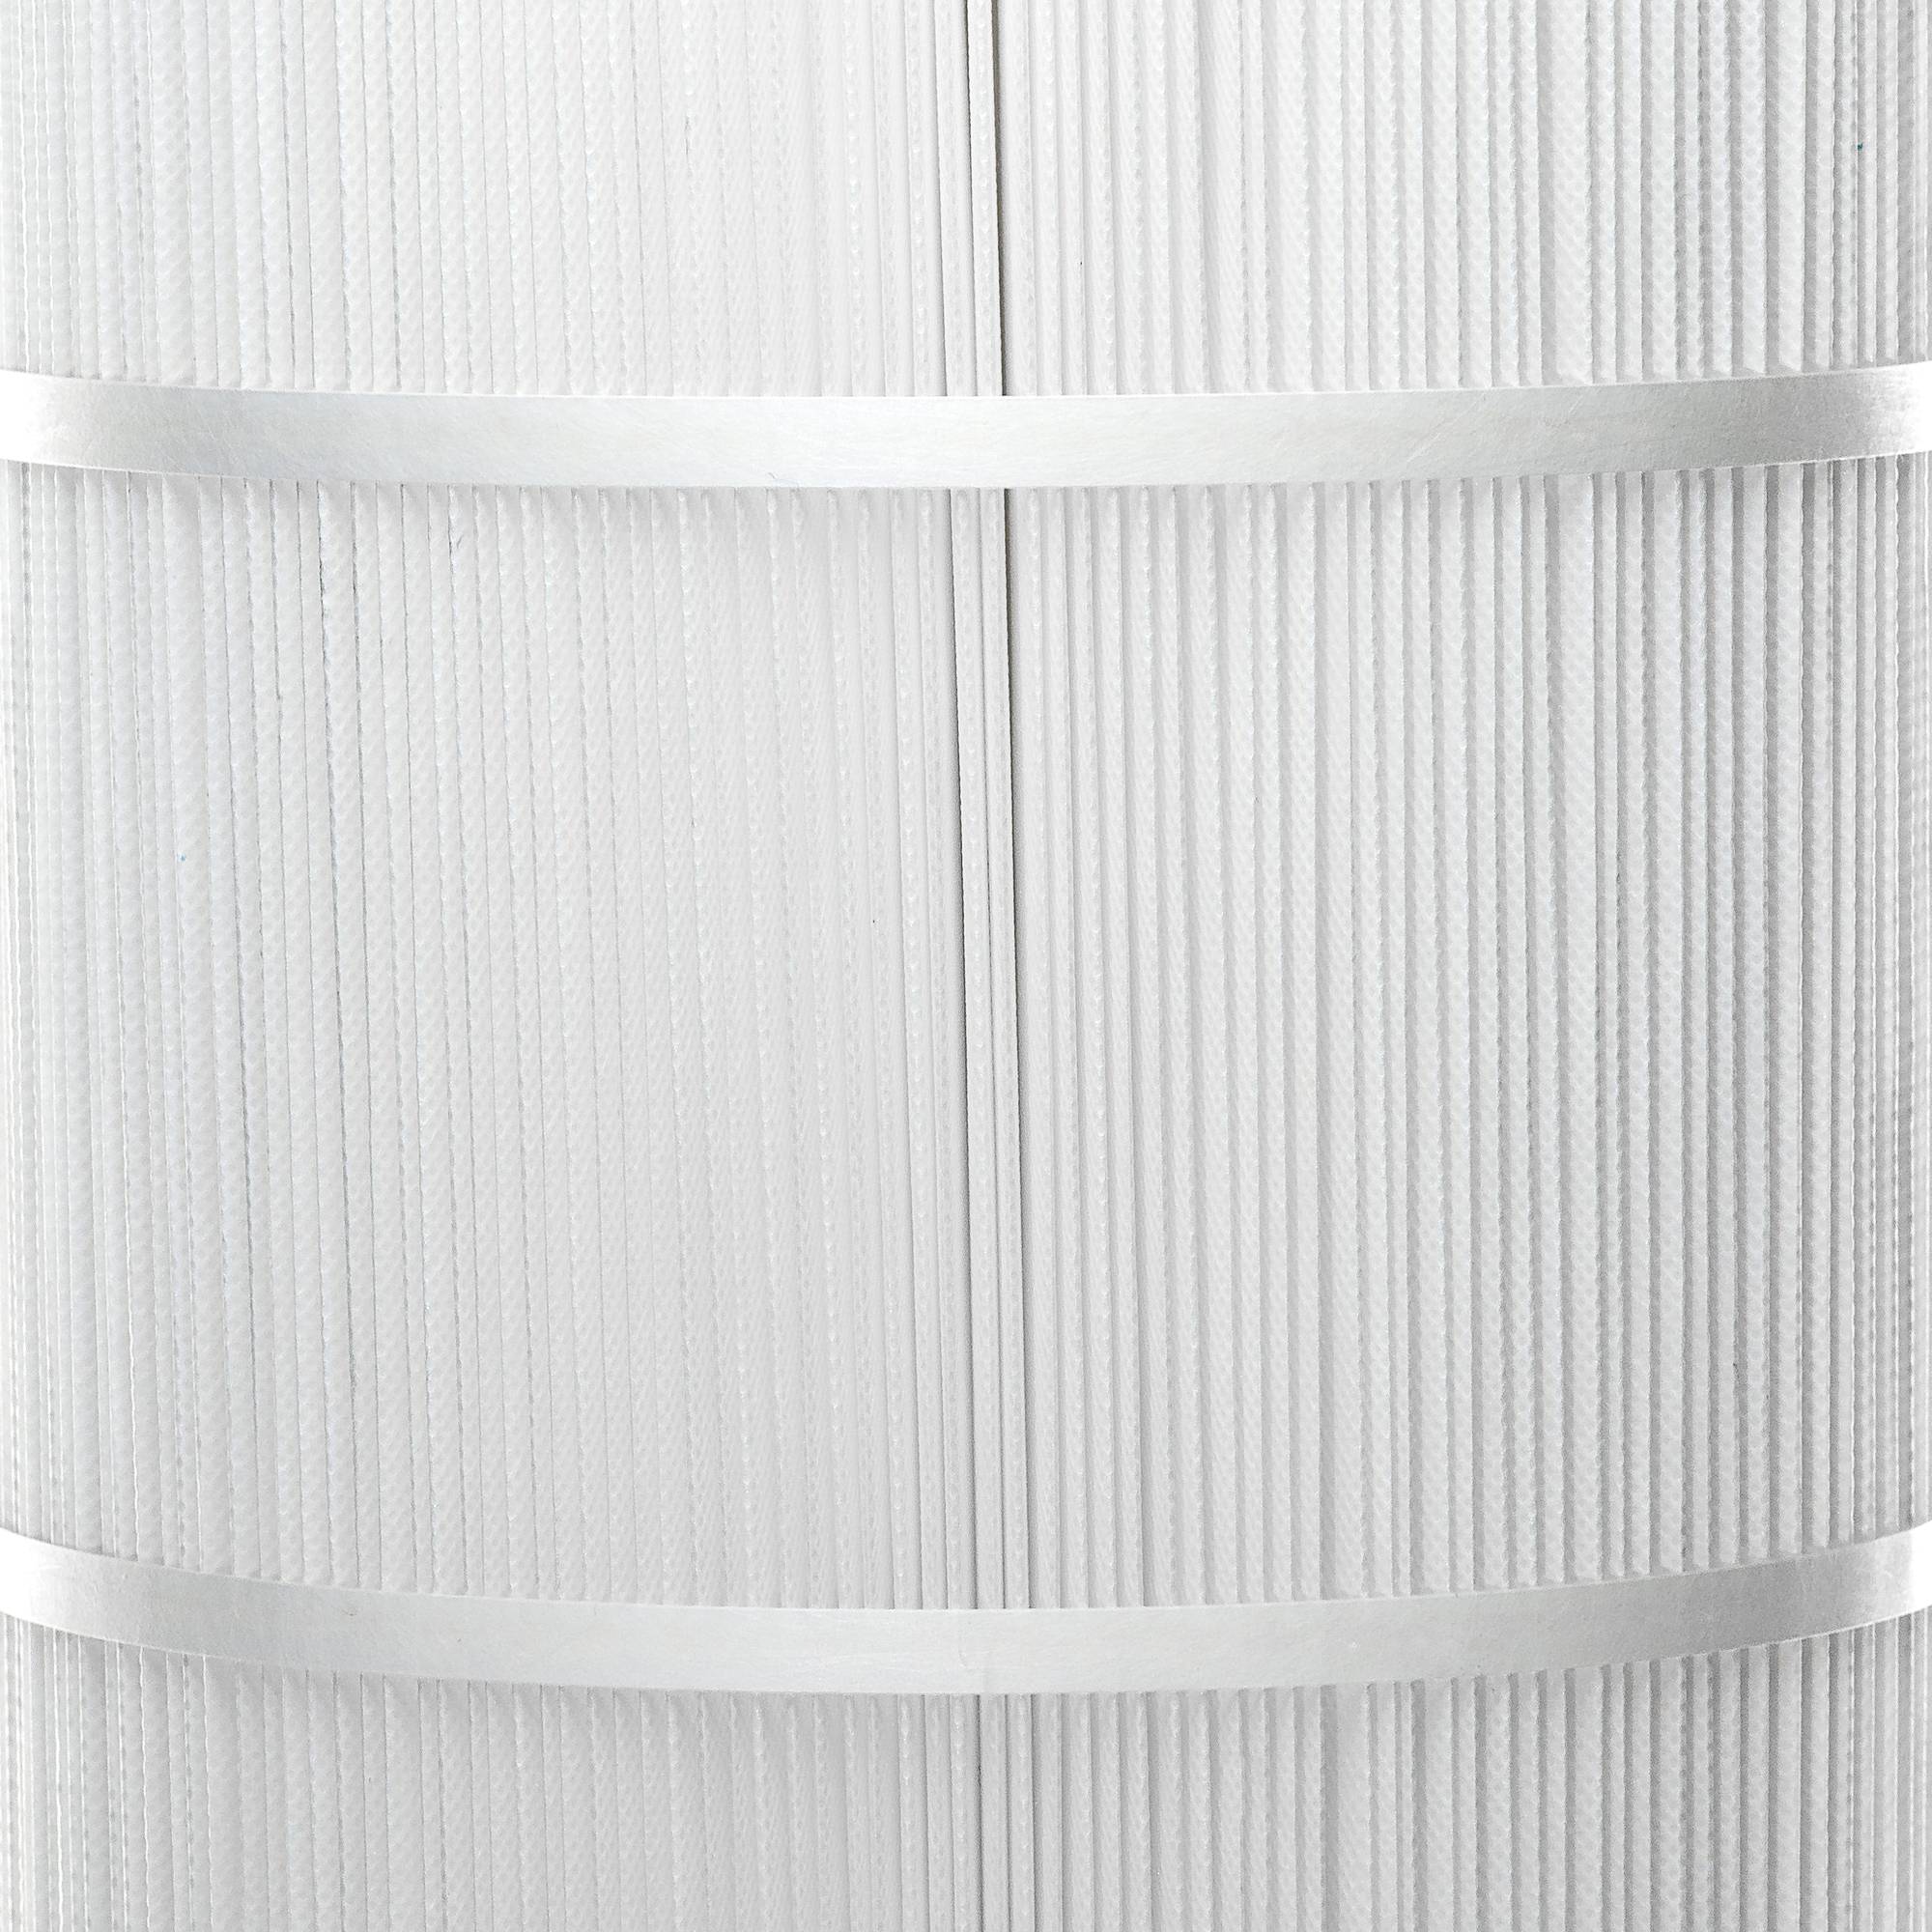 Filters Fast® FF-0121 Replacement Pool & Spa Filter Cartridge